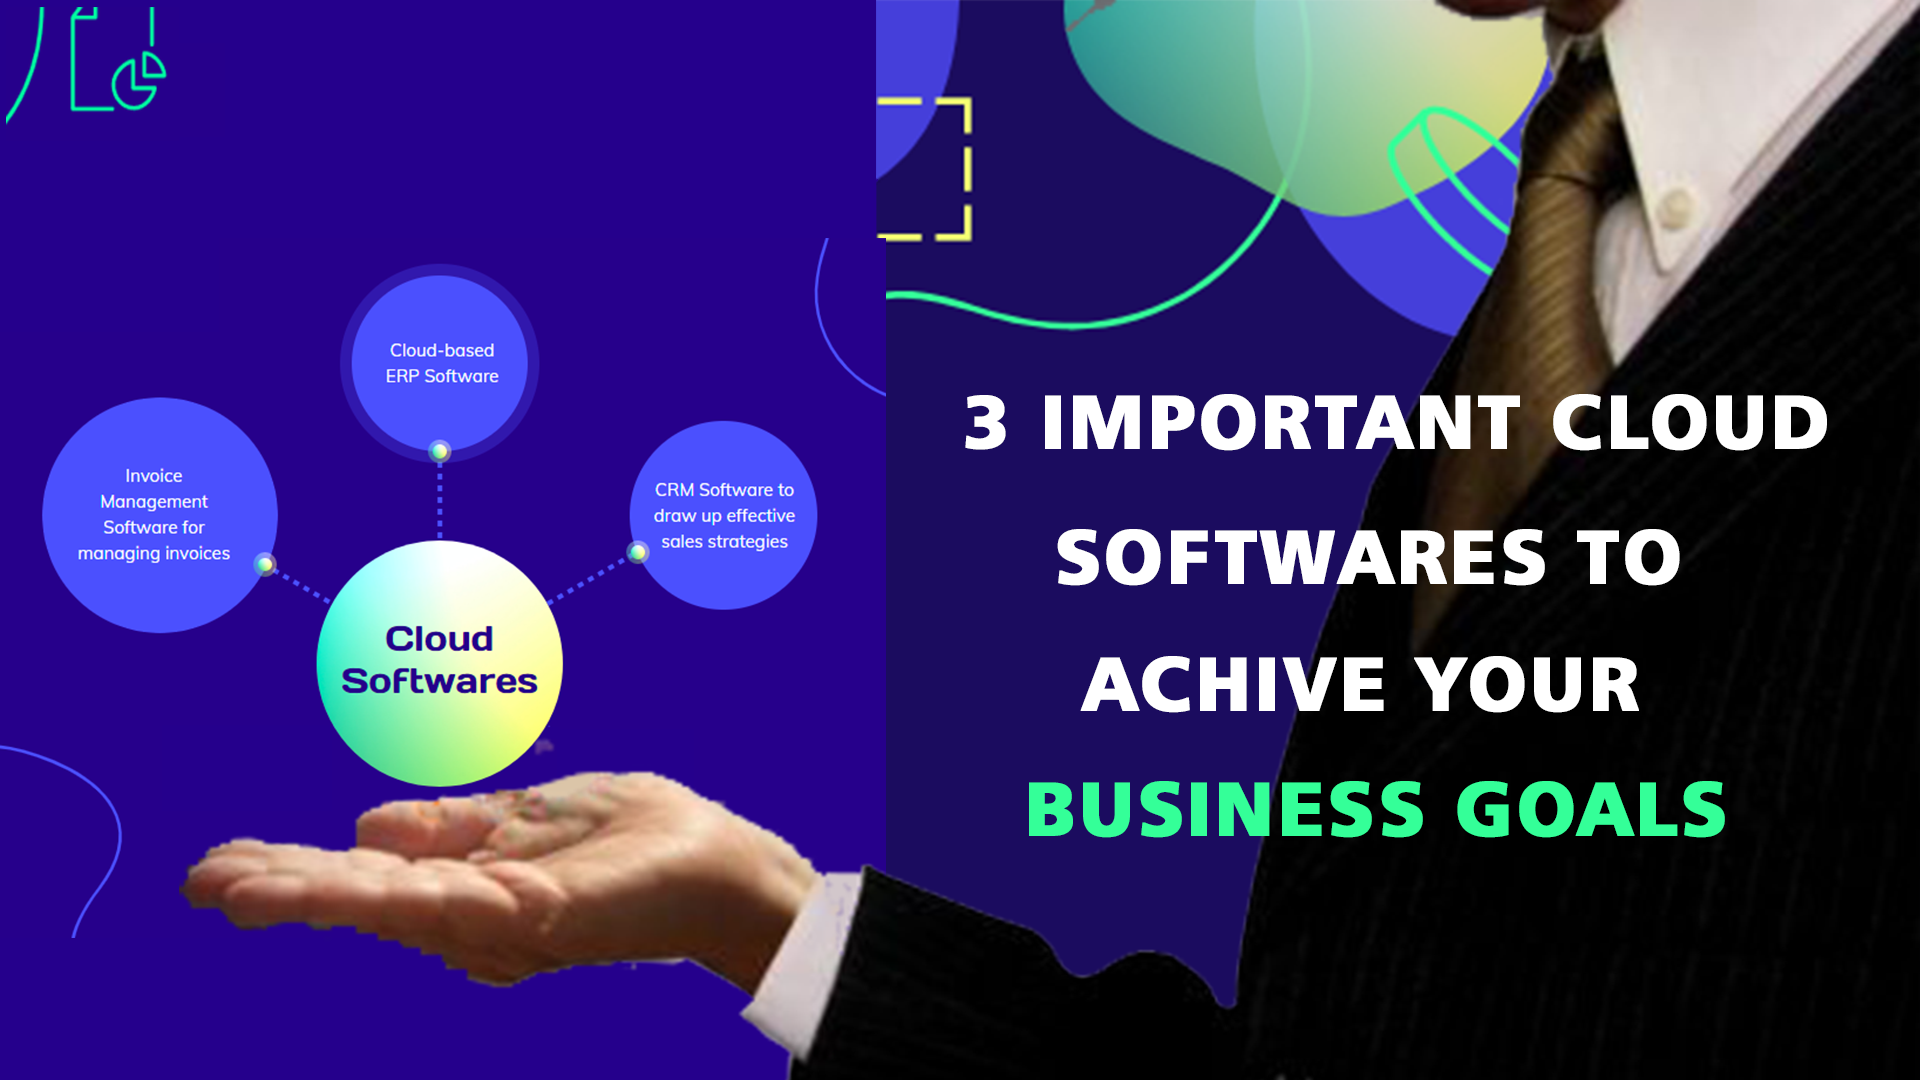 3 Important Cloud Softwares to Achieve your Business Goals